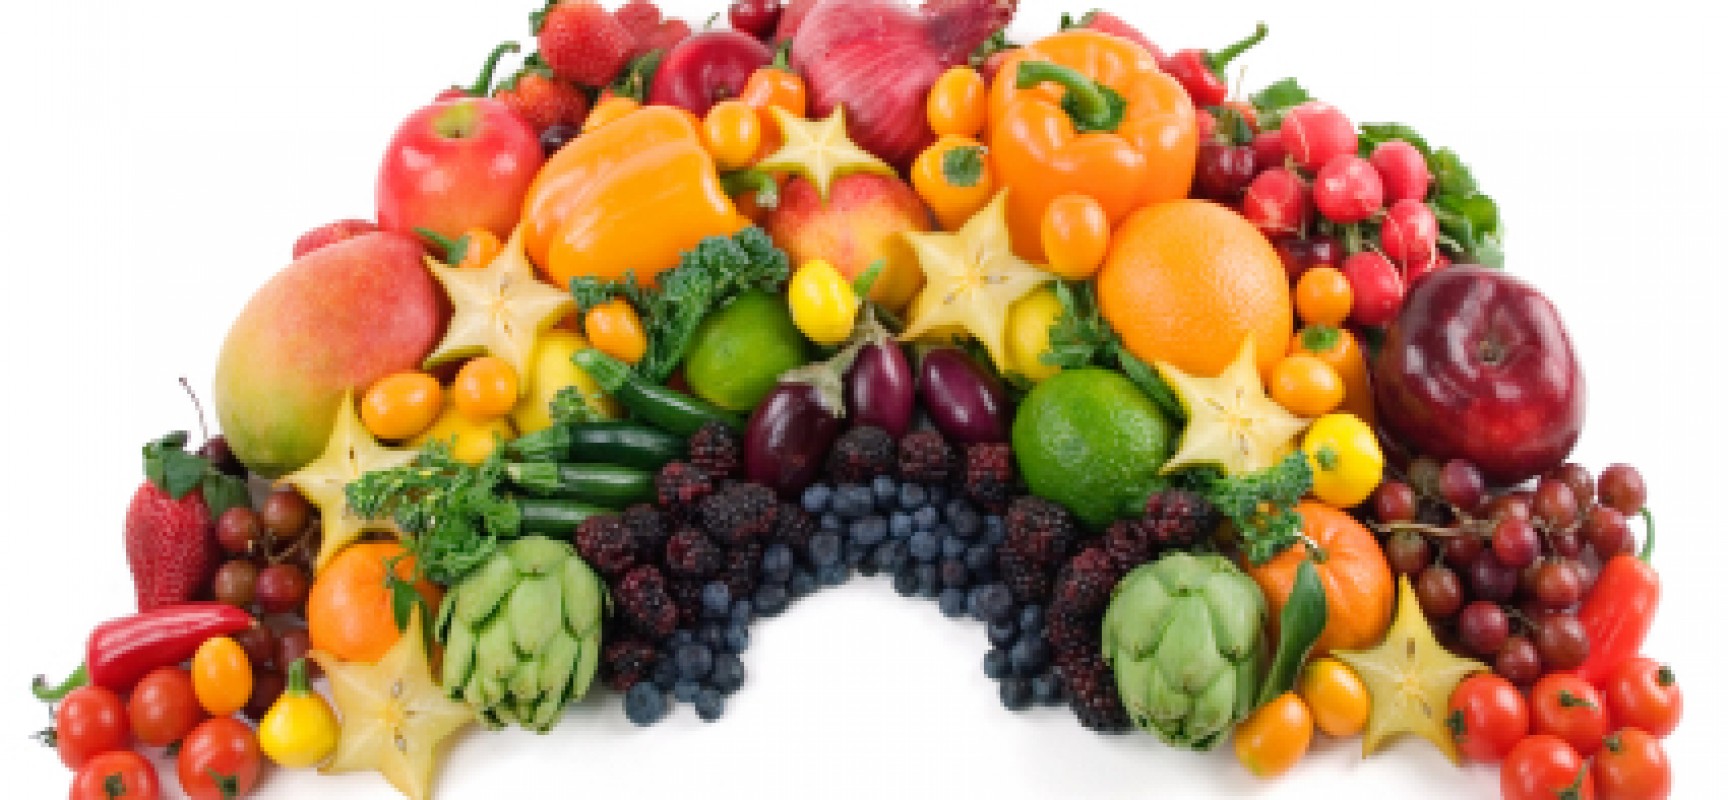 Eat a food Rainbow and Colour yourself Healthy!